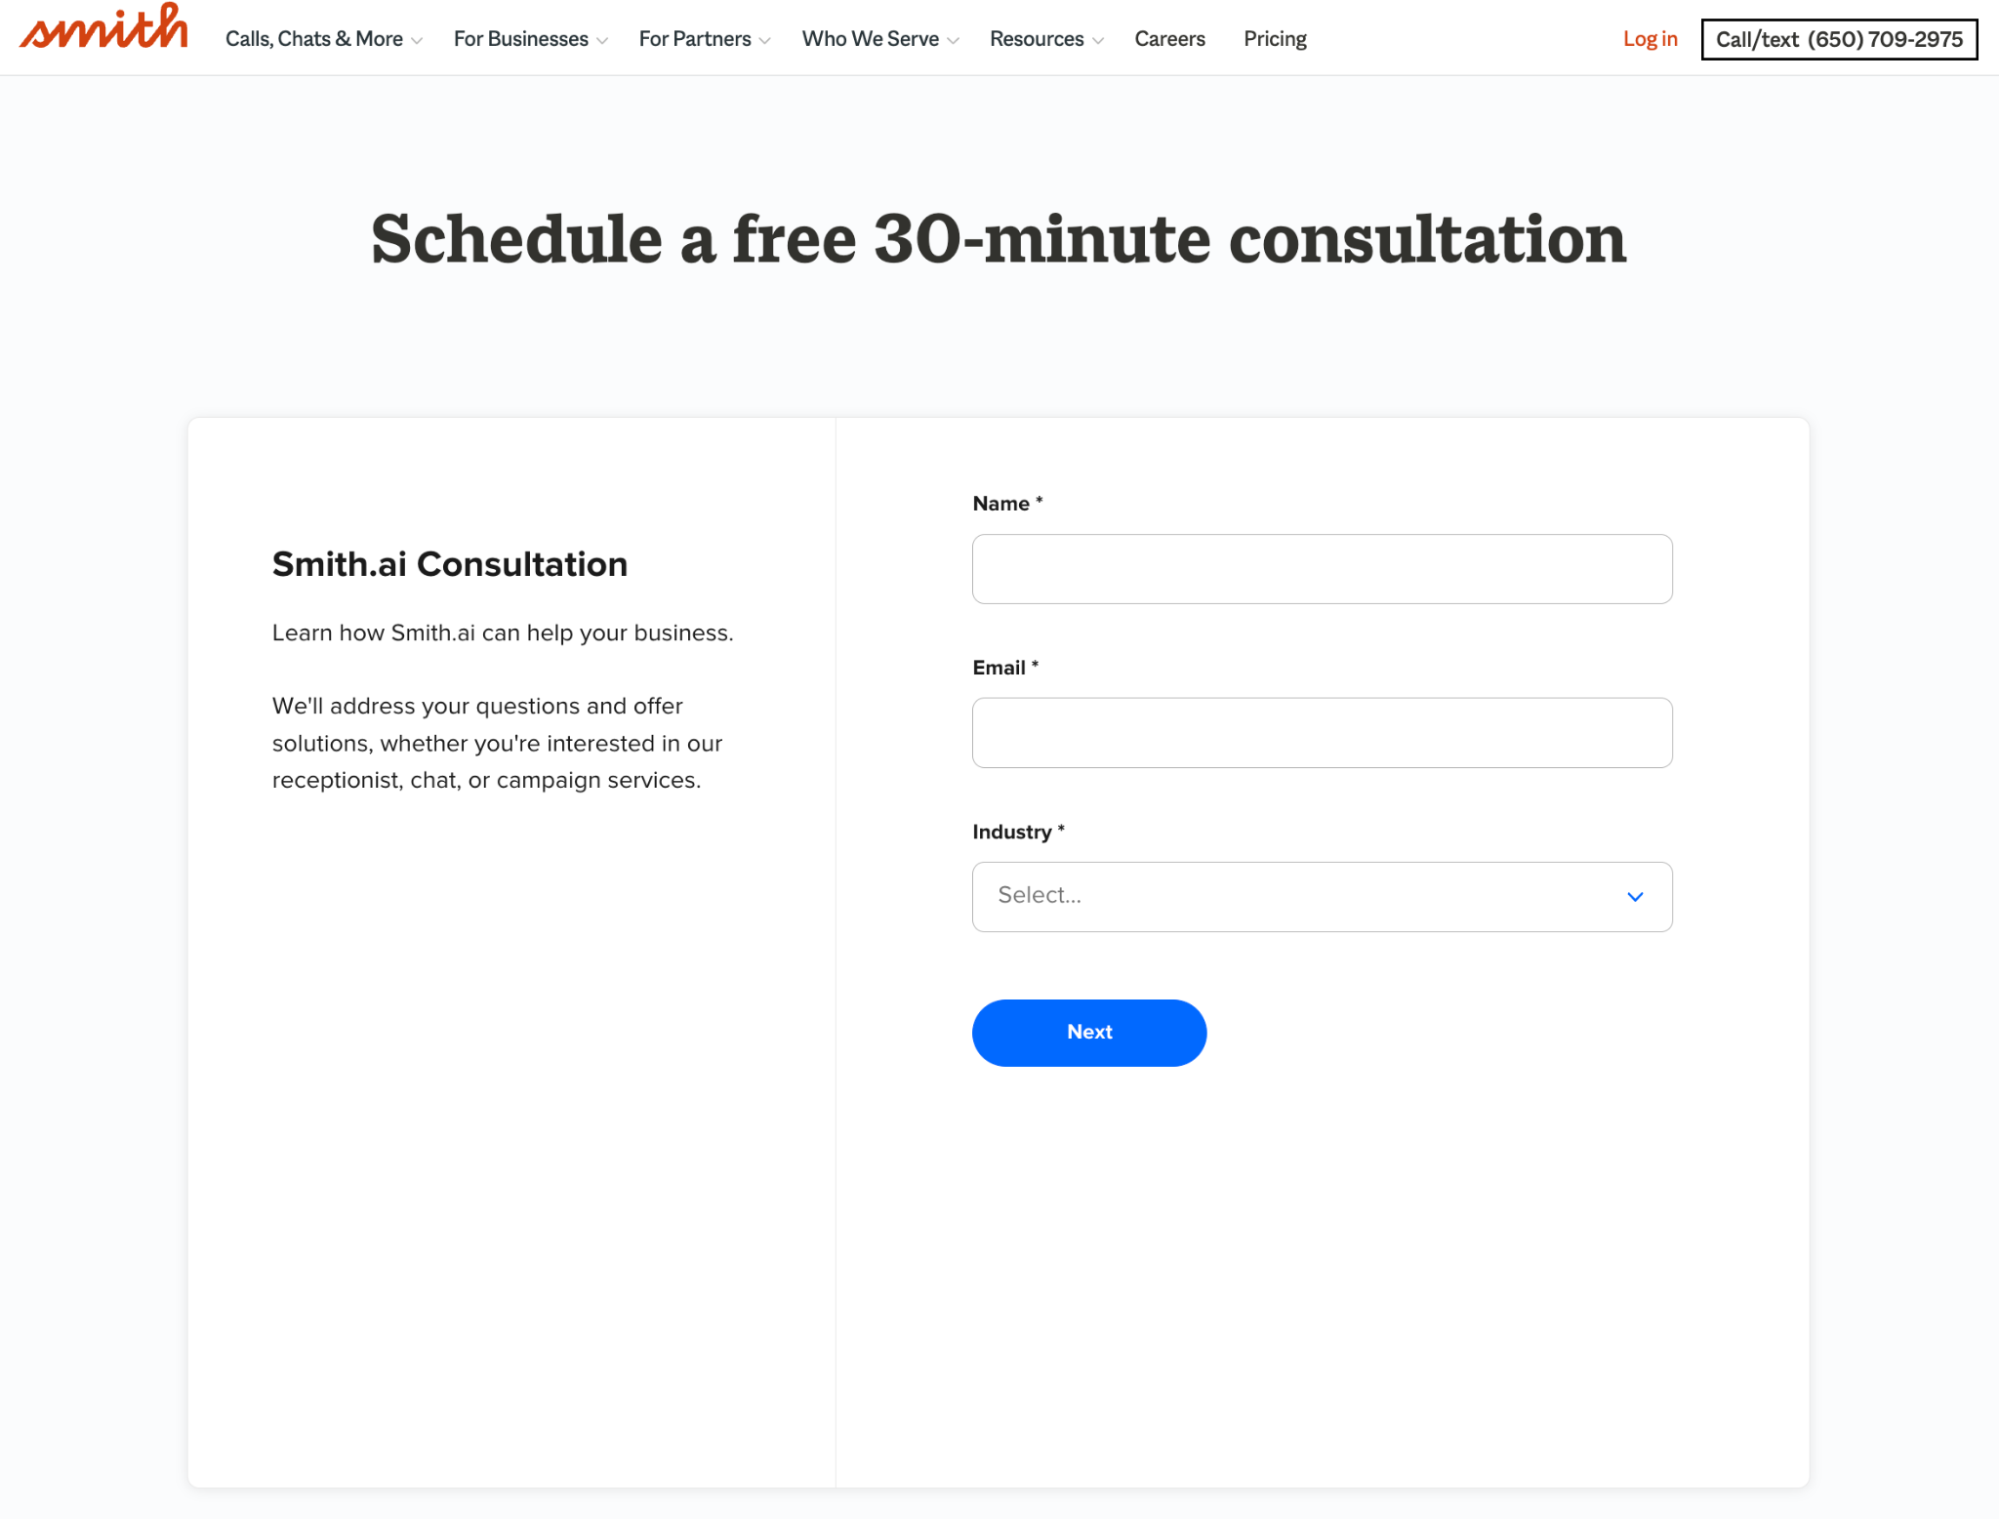 Screenshot of "Schedule a free 30-minute consultation" page on the Smith.ai website. The form asks for name, email, and industry.